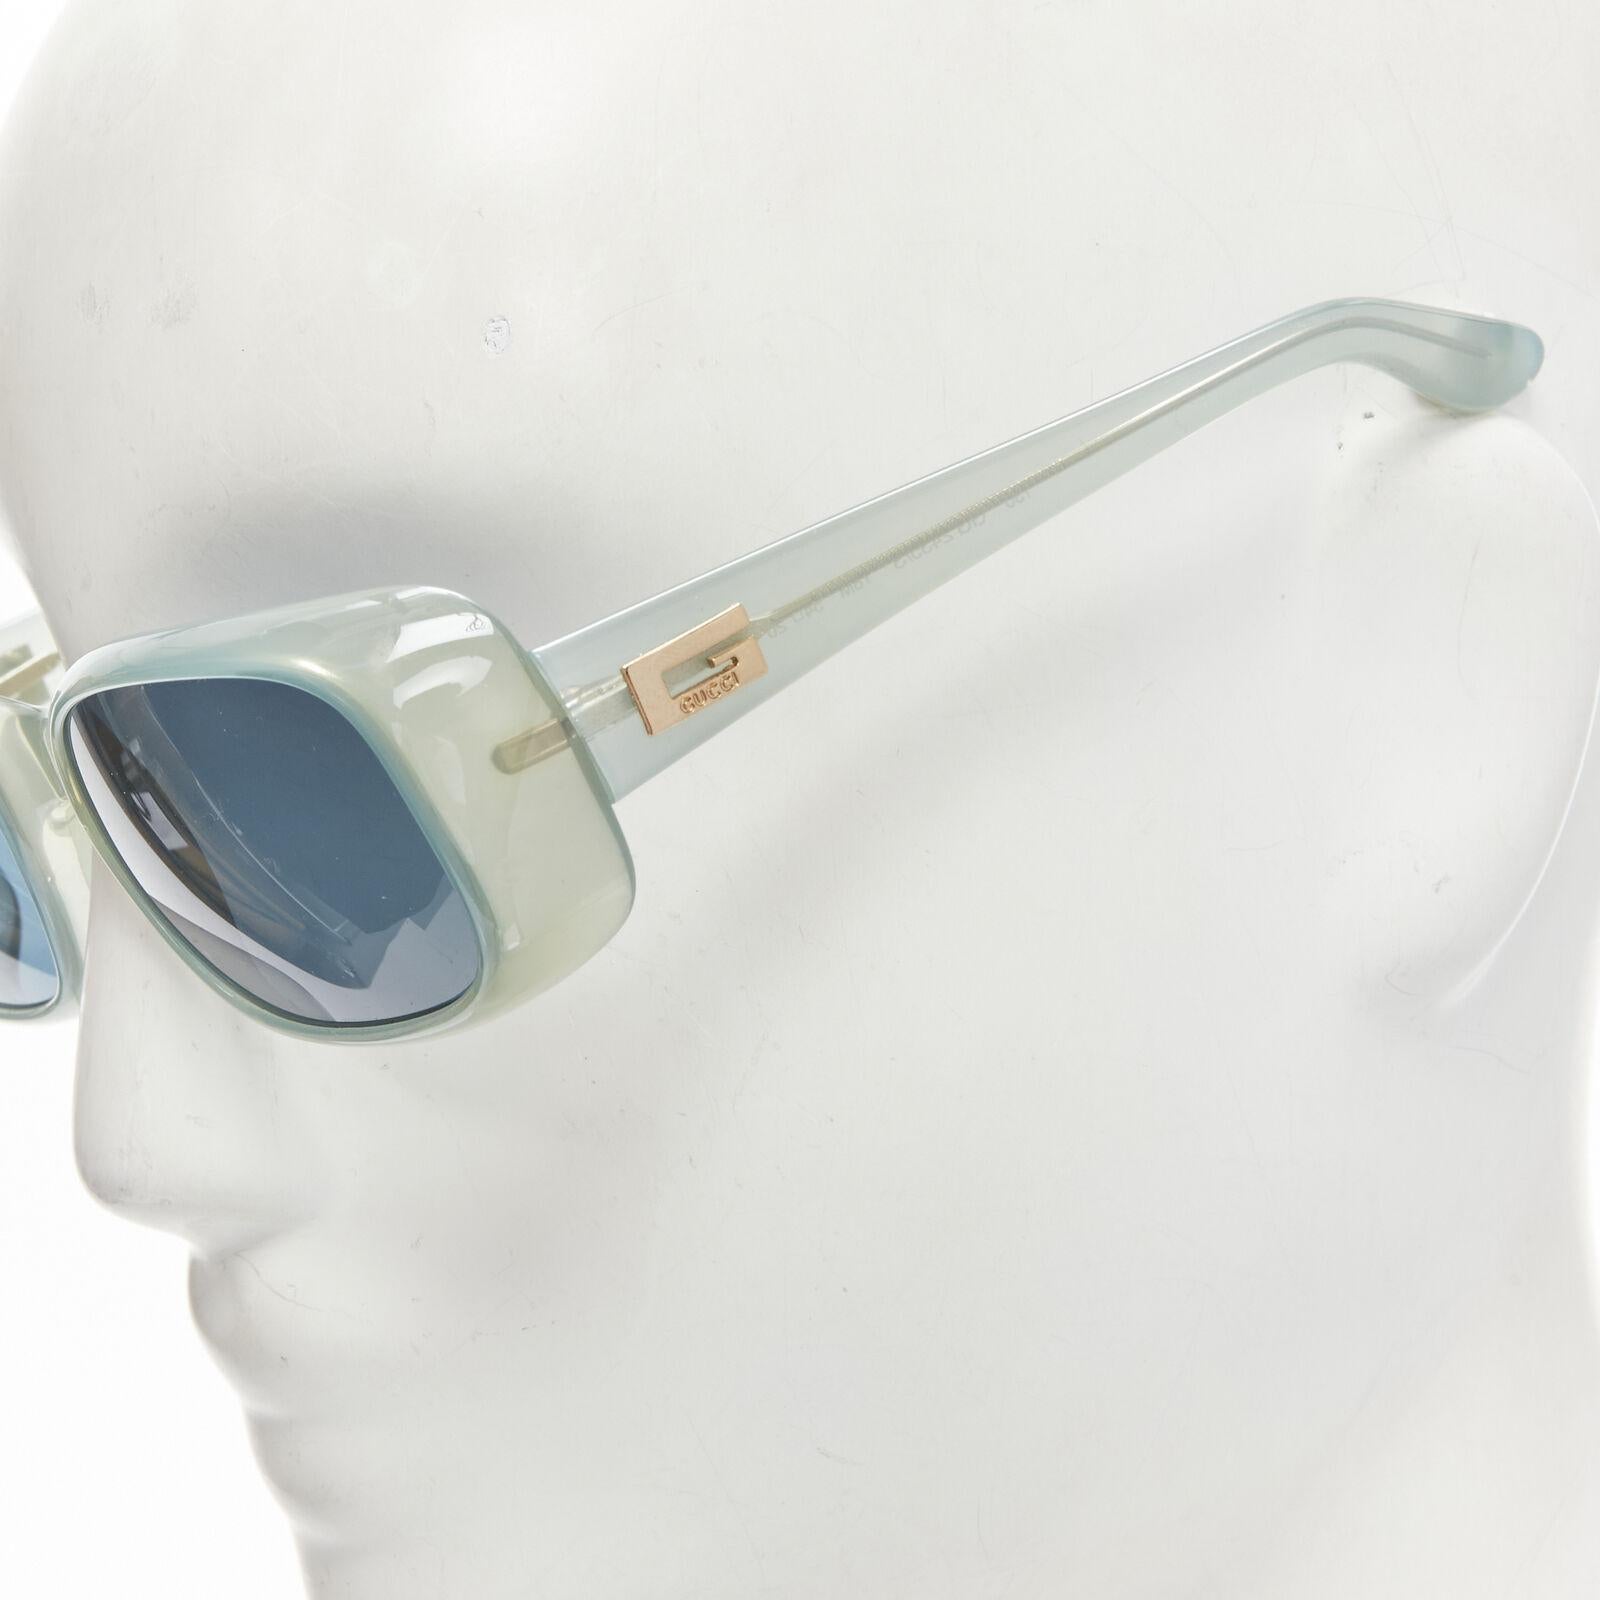 GUCCI Vintage Y2K GG2435/S T8M gold tone GG logo blue rectangular sunglasses
Reference: ANWU/A00855
Brand: Gucci
Model: GG2435/S
Material: Plastic
Color: Blue
Pattern: Solid
Made in: Italy

CONDITION:
Condition: Very good, this item was pre-owned